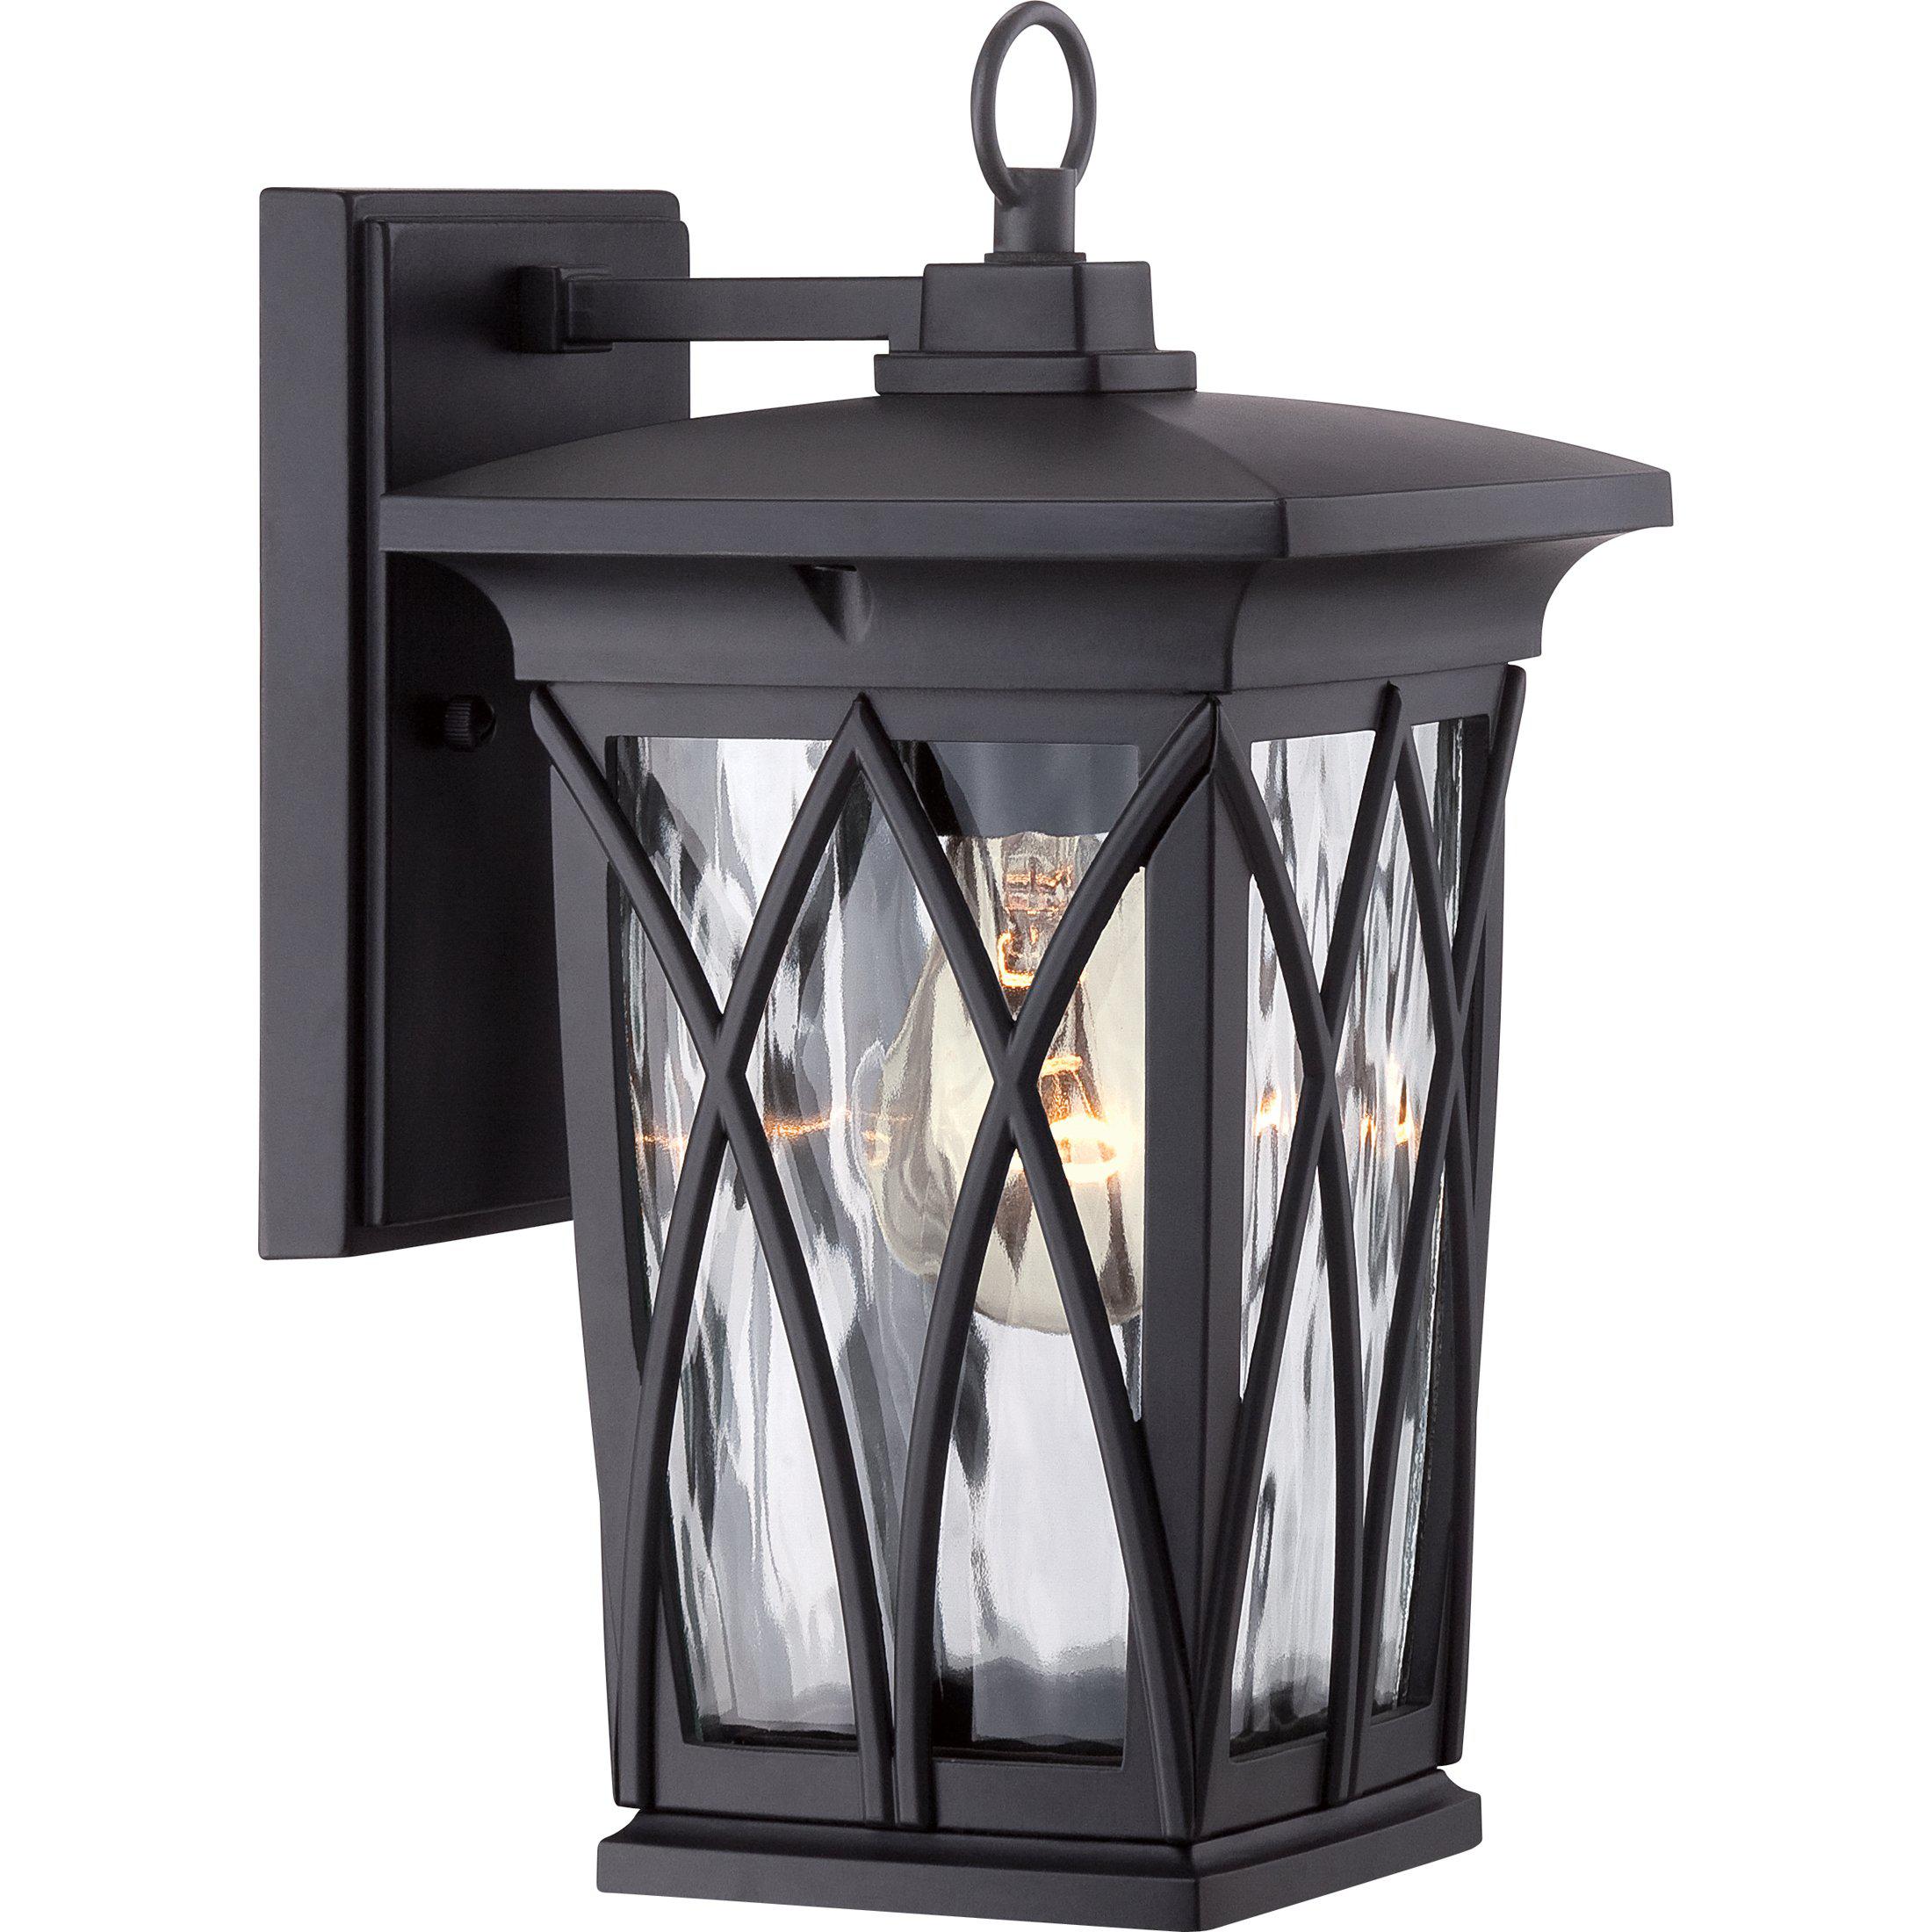 Quoizel  Grover Outdoor Lantern, Small Outdoor l Wall Quoizel Mystic Black  